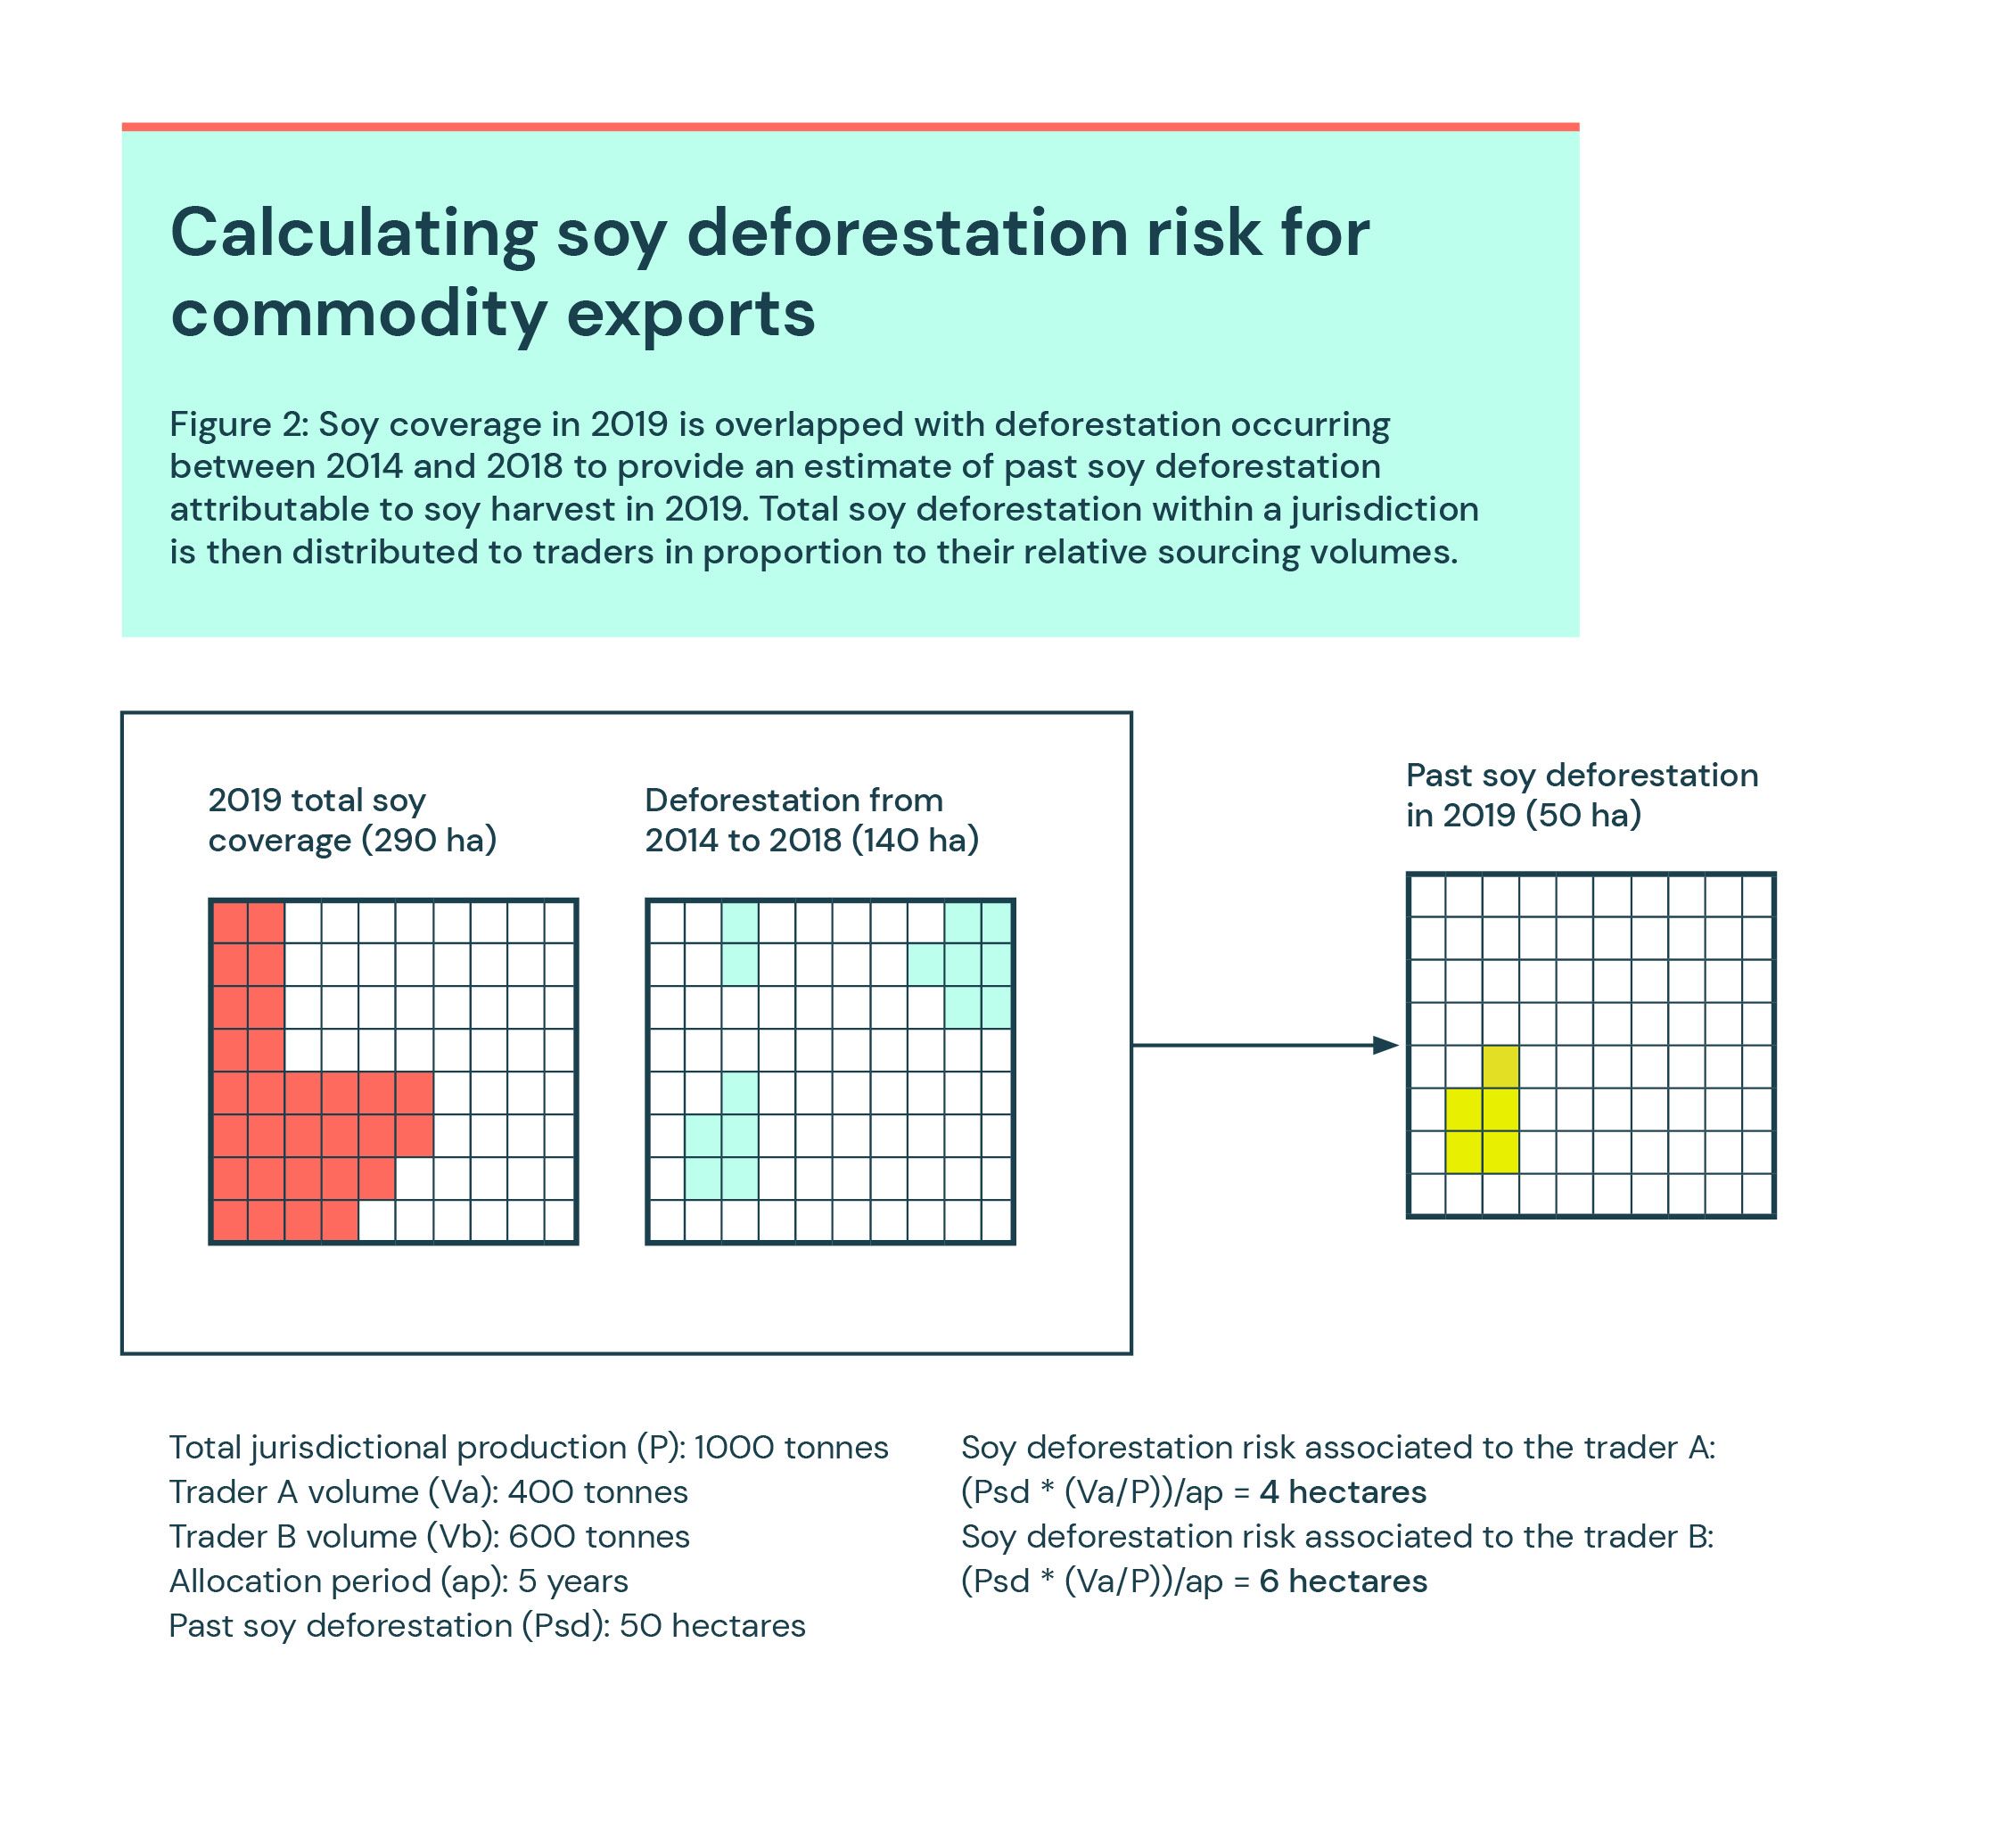 Calculating soy deforestation risk for commodity exports